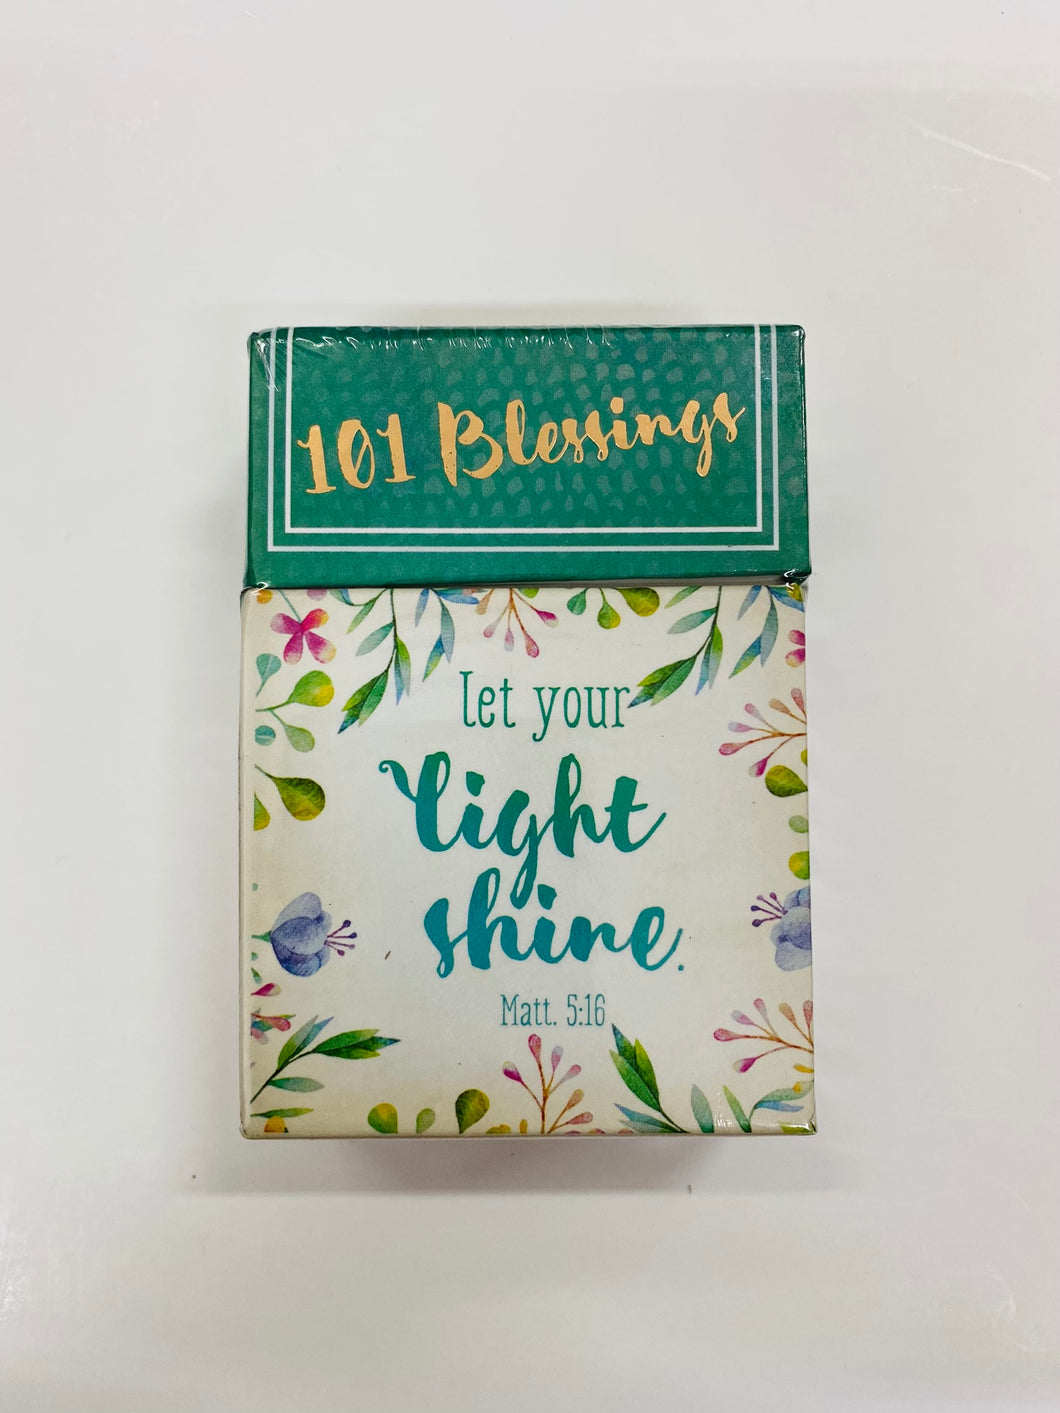 Inspirational Wallet Cards: 101 Blessings: Let your Light Shine